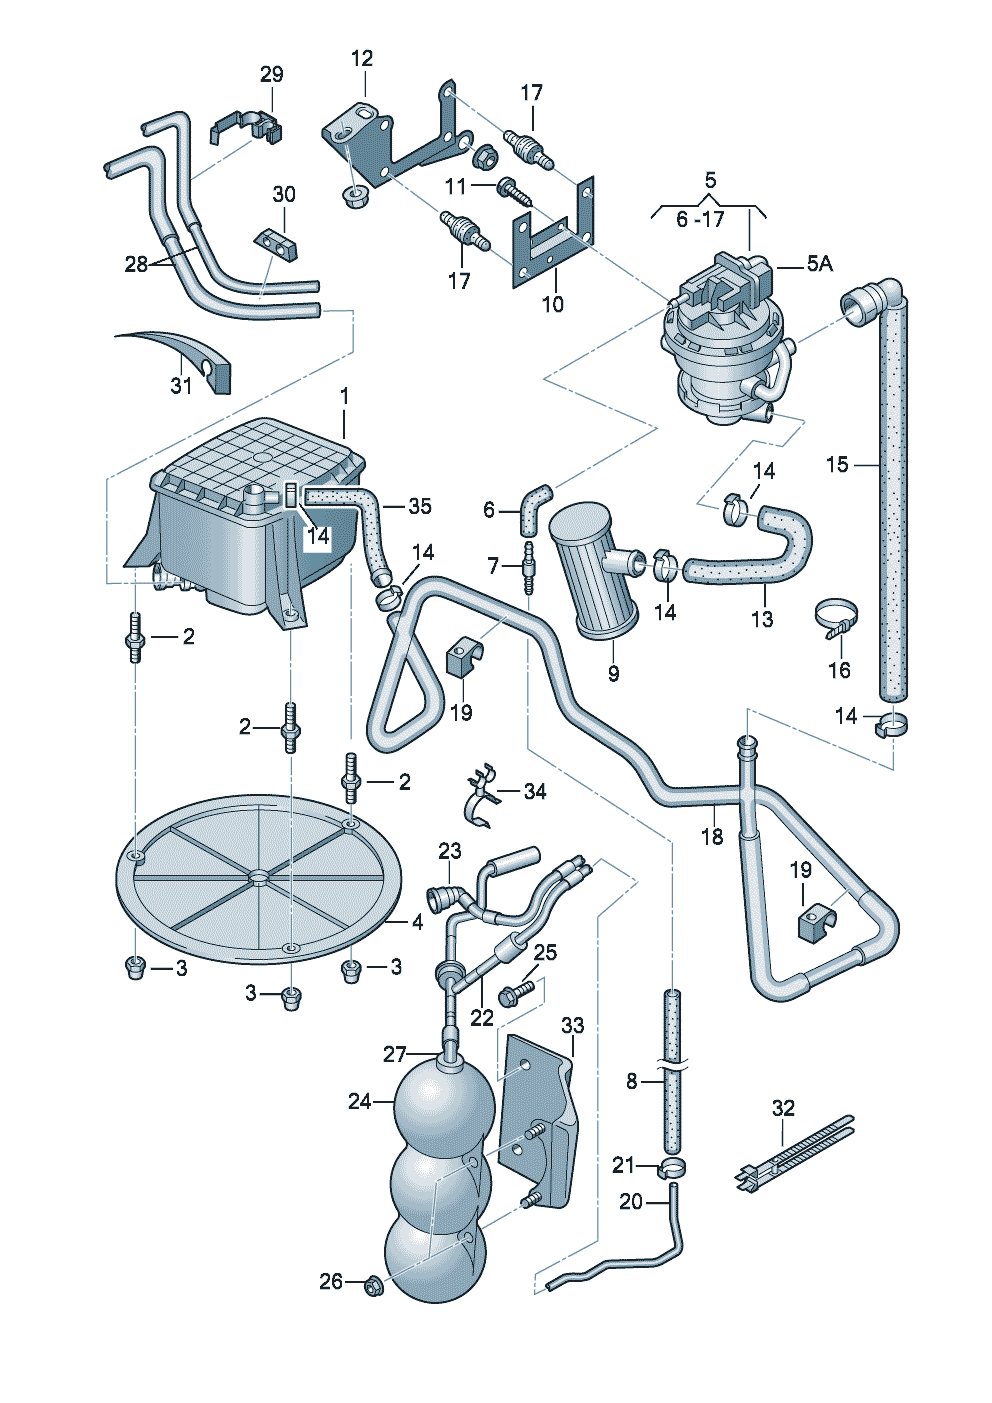 Activated charcoal containerdiagnosis pump for fuel<br>systemdiagnosis pump for fuel<br>system             see illustration:  201-075 - Audi A4/Avant - a4